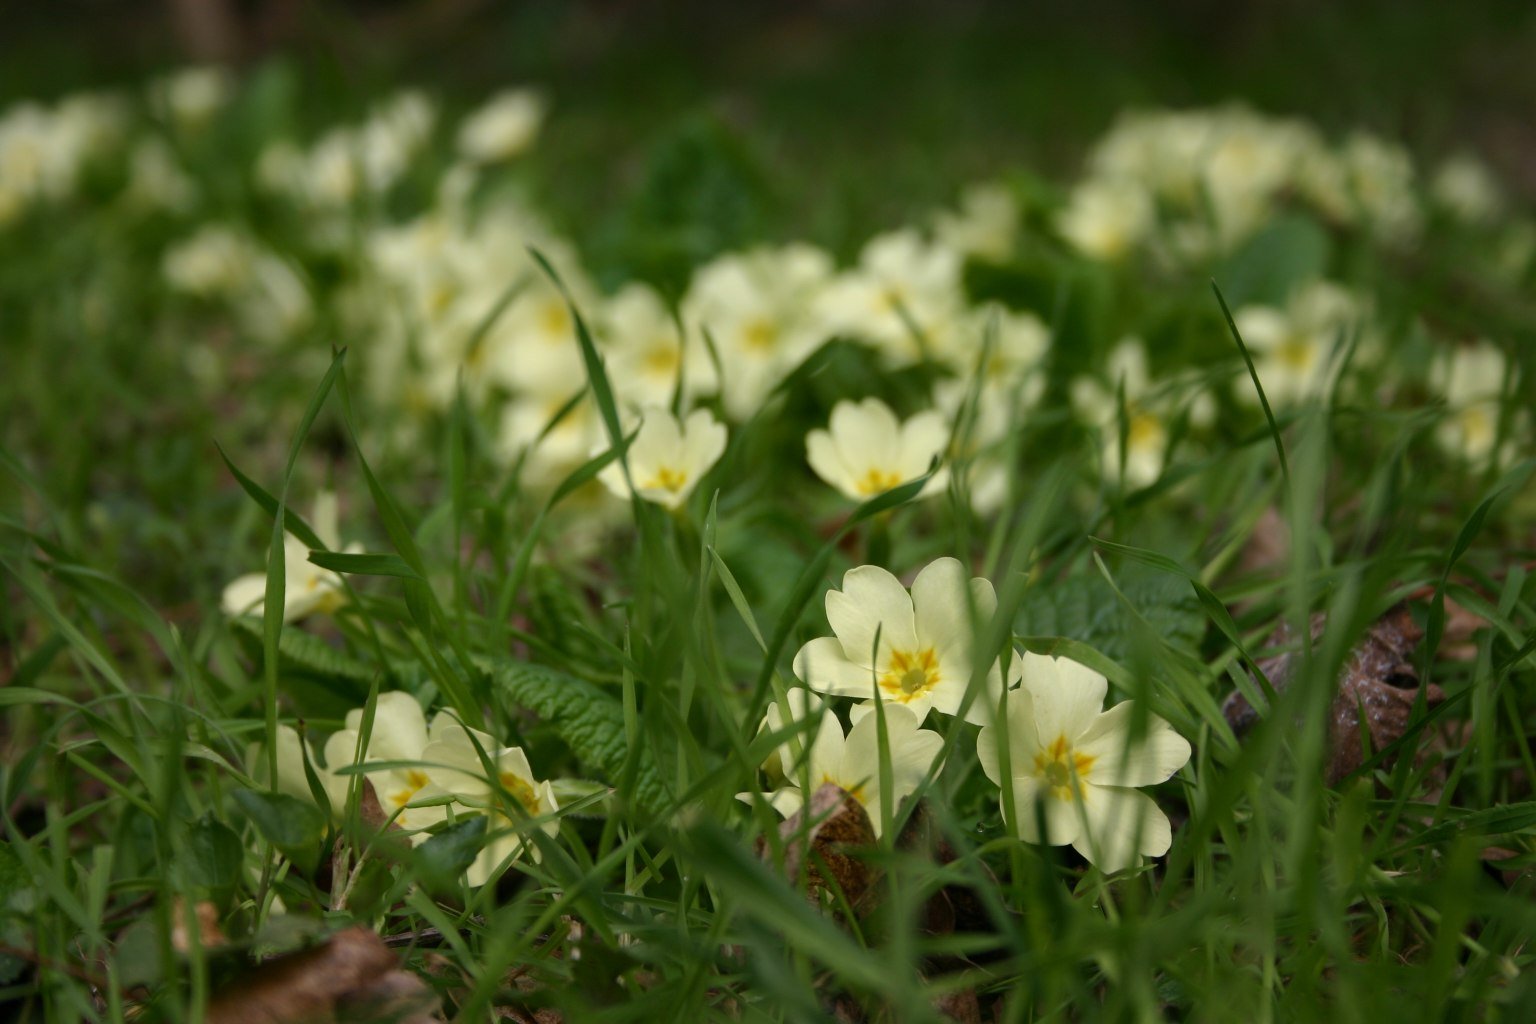 flowers that are laying in the grass near the ground